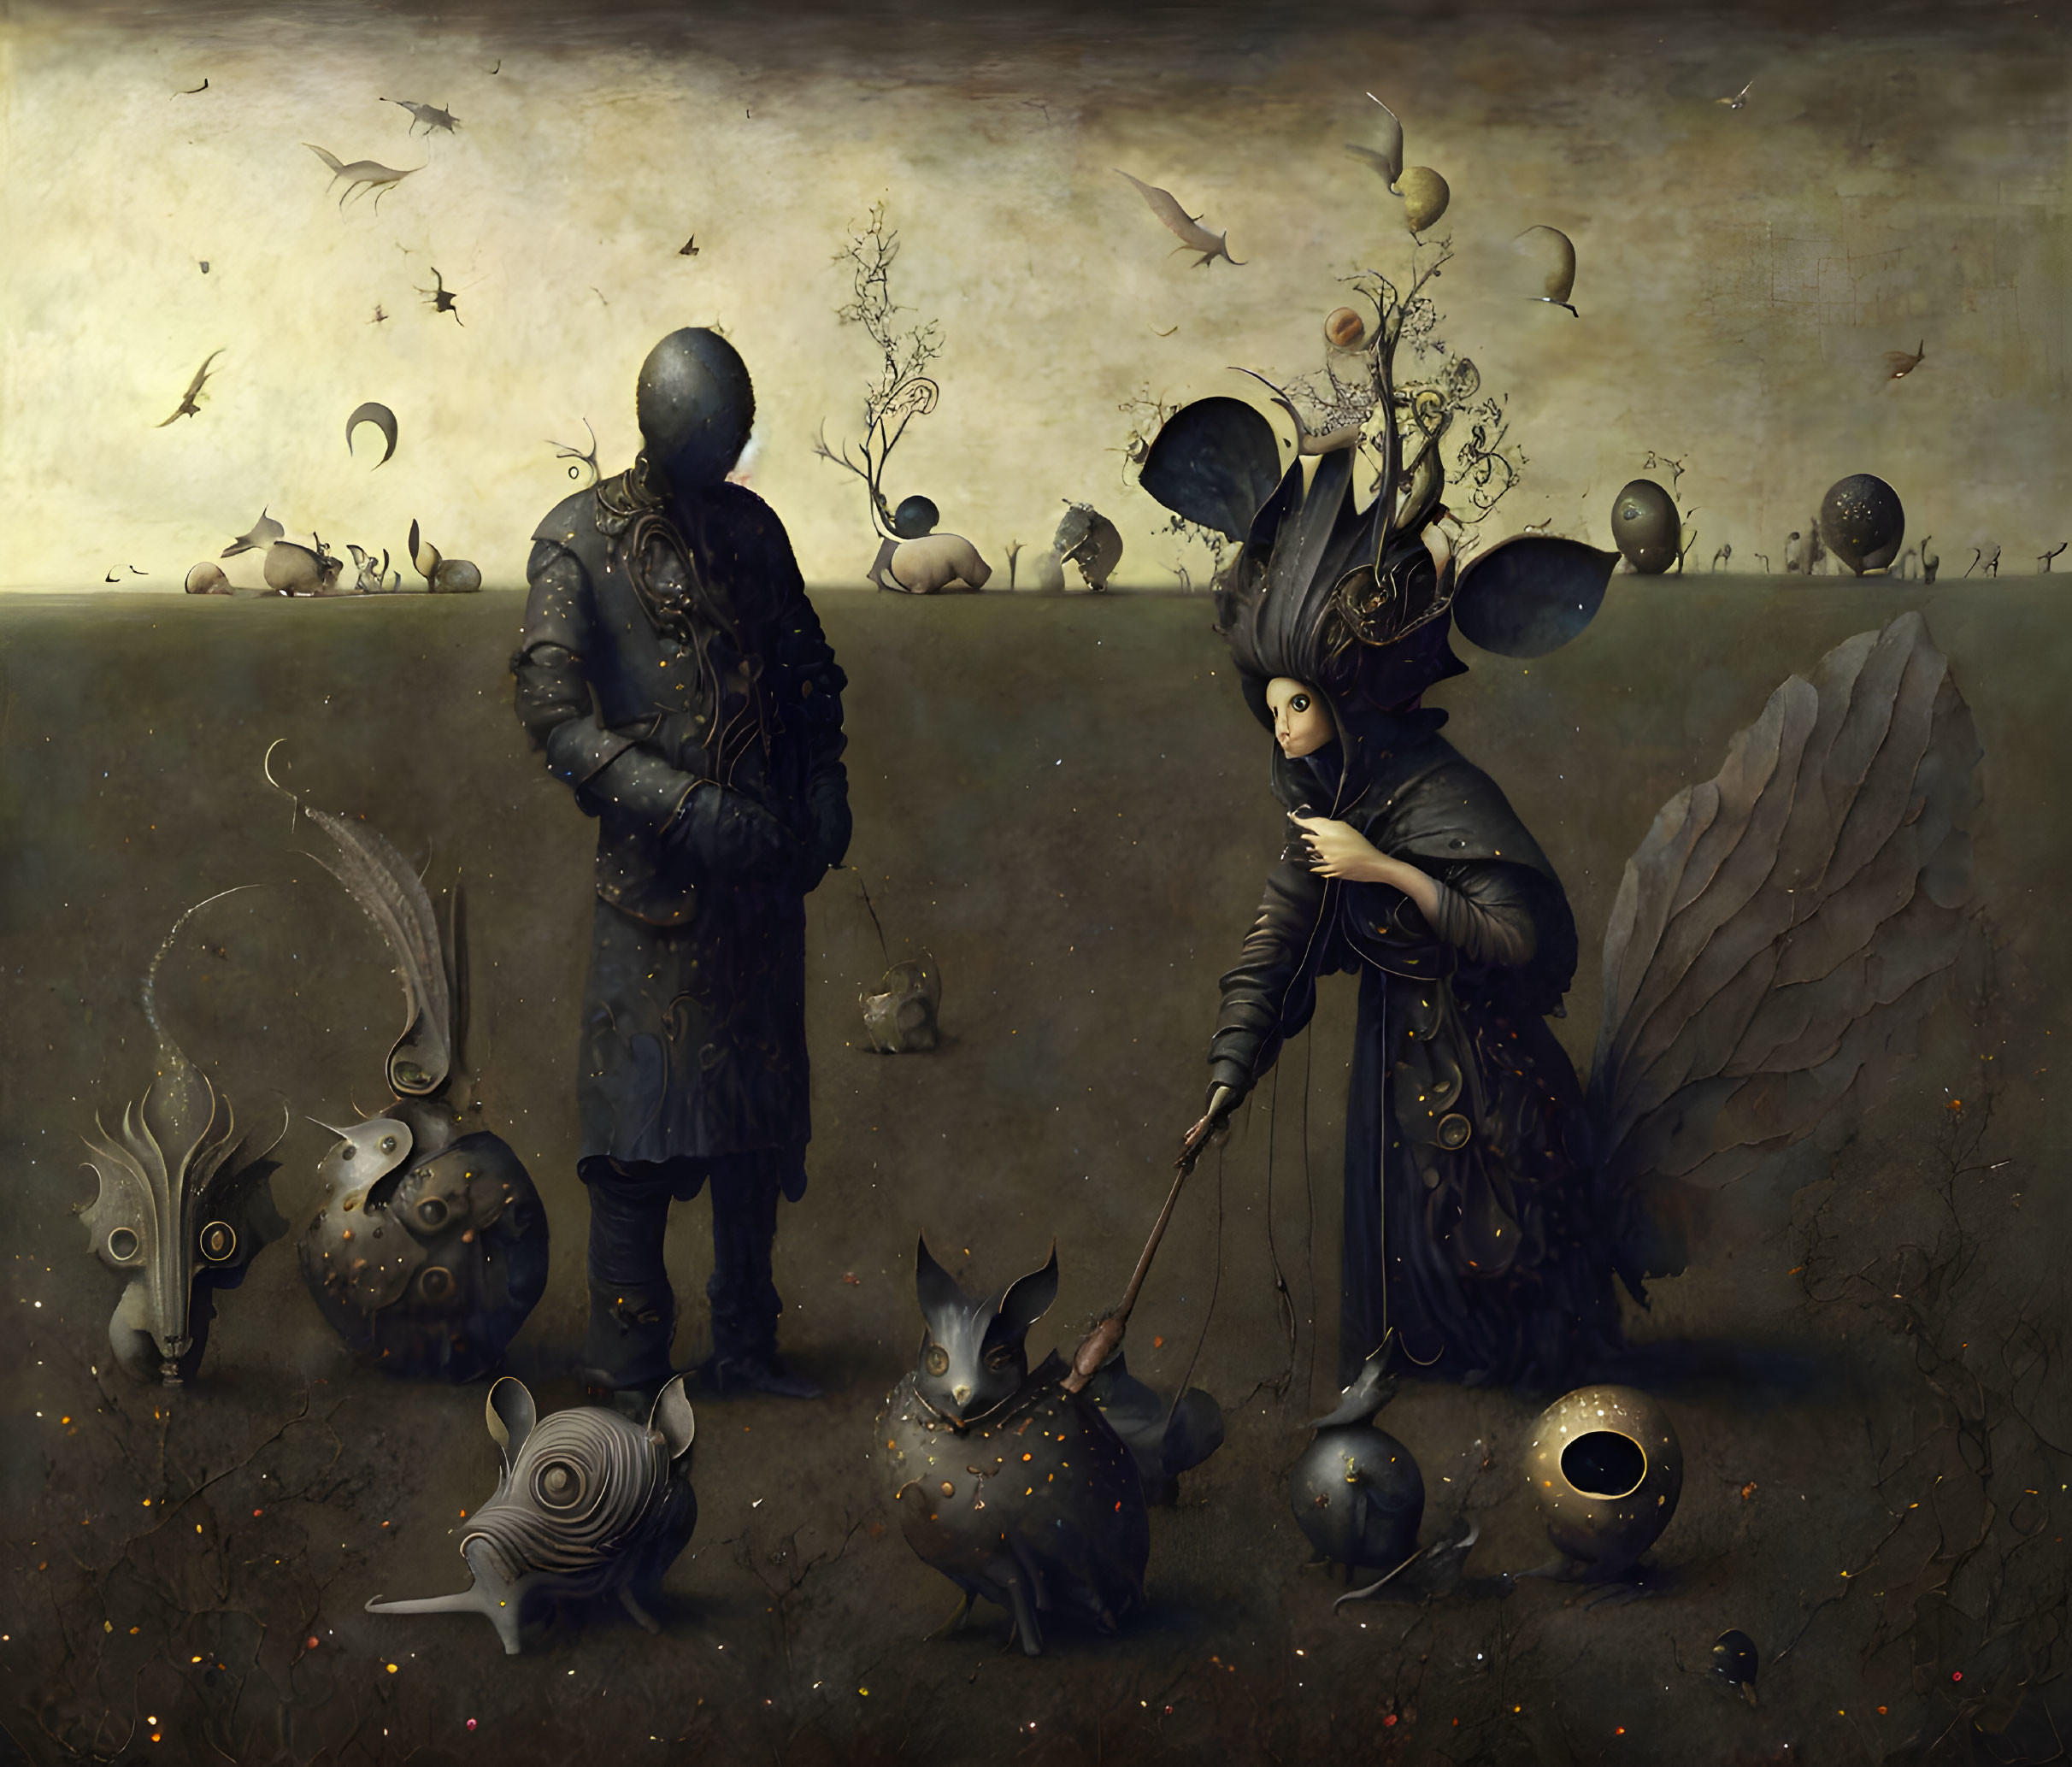 Surreal painting featuring figures in ornate outfits and whimsical landscape